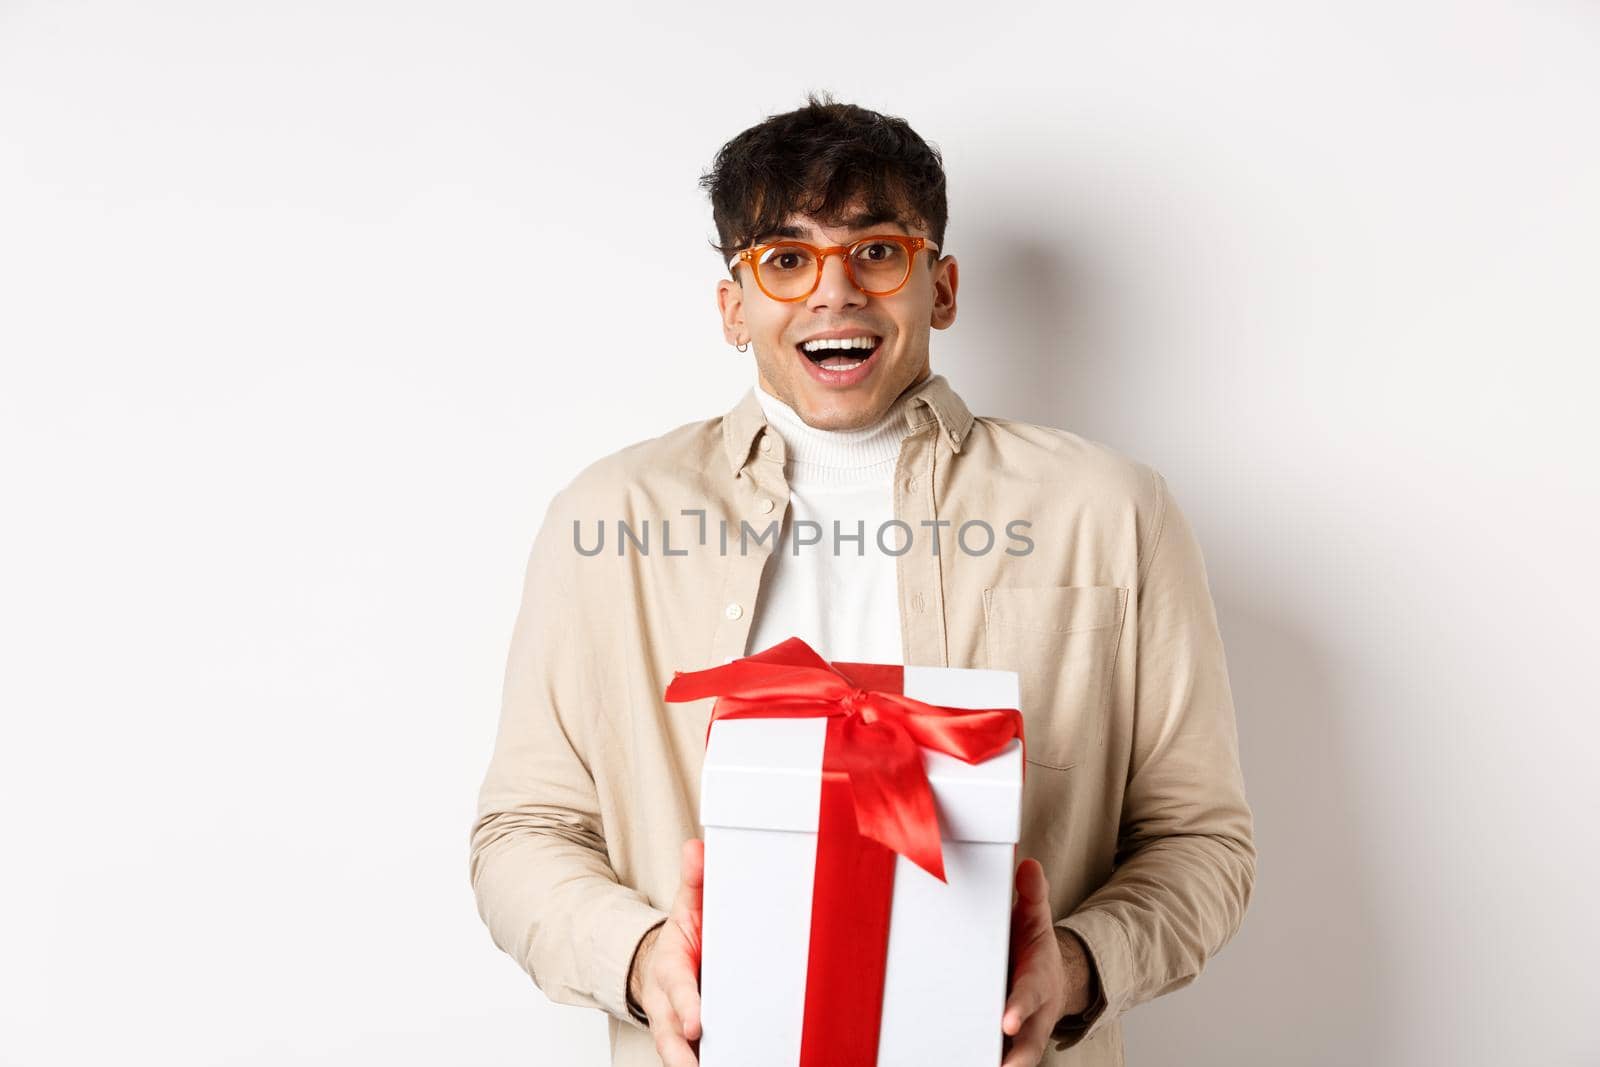 Surprised happy guy receiving a gift, holding present box and smiling amazed, standing on white background.